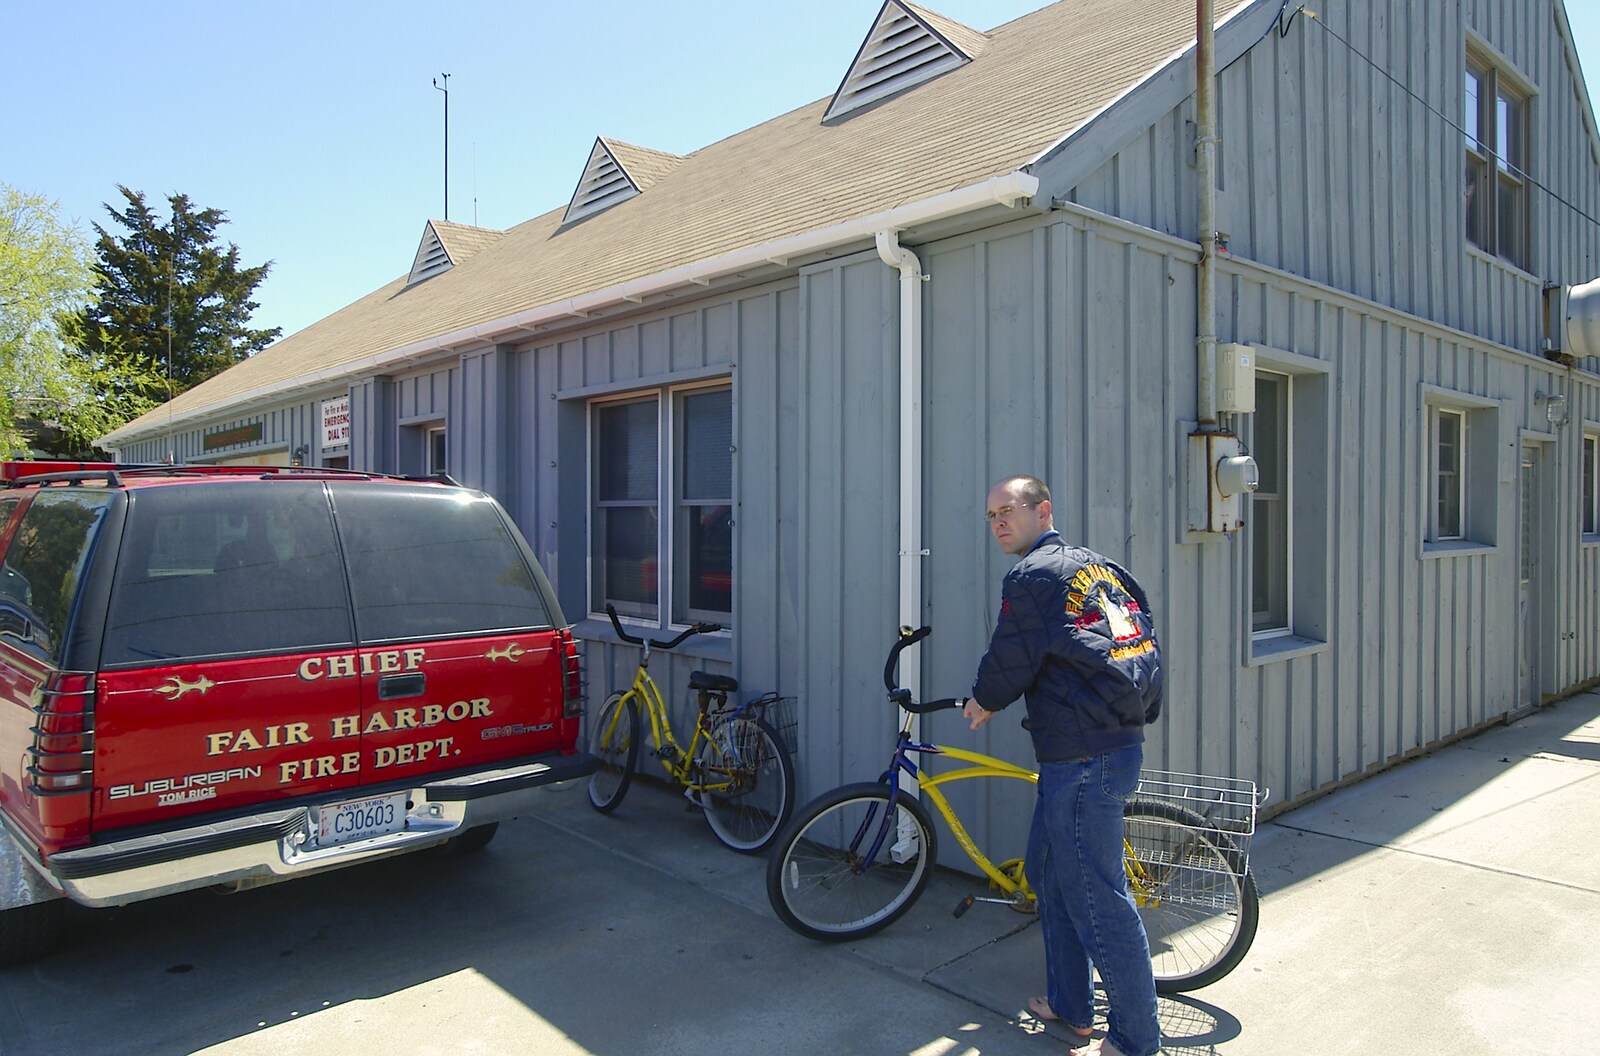 We grab the bikes to cycle back to the beach house from Phil and the Fair Harbor Fire Engine, Fire Island, New York State, US - 30th April 2006